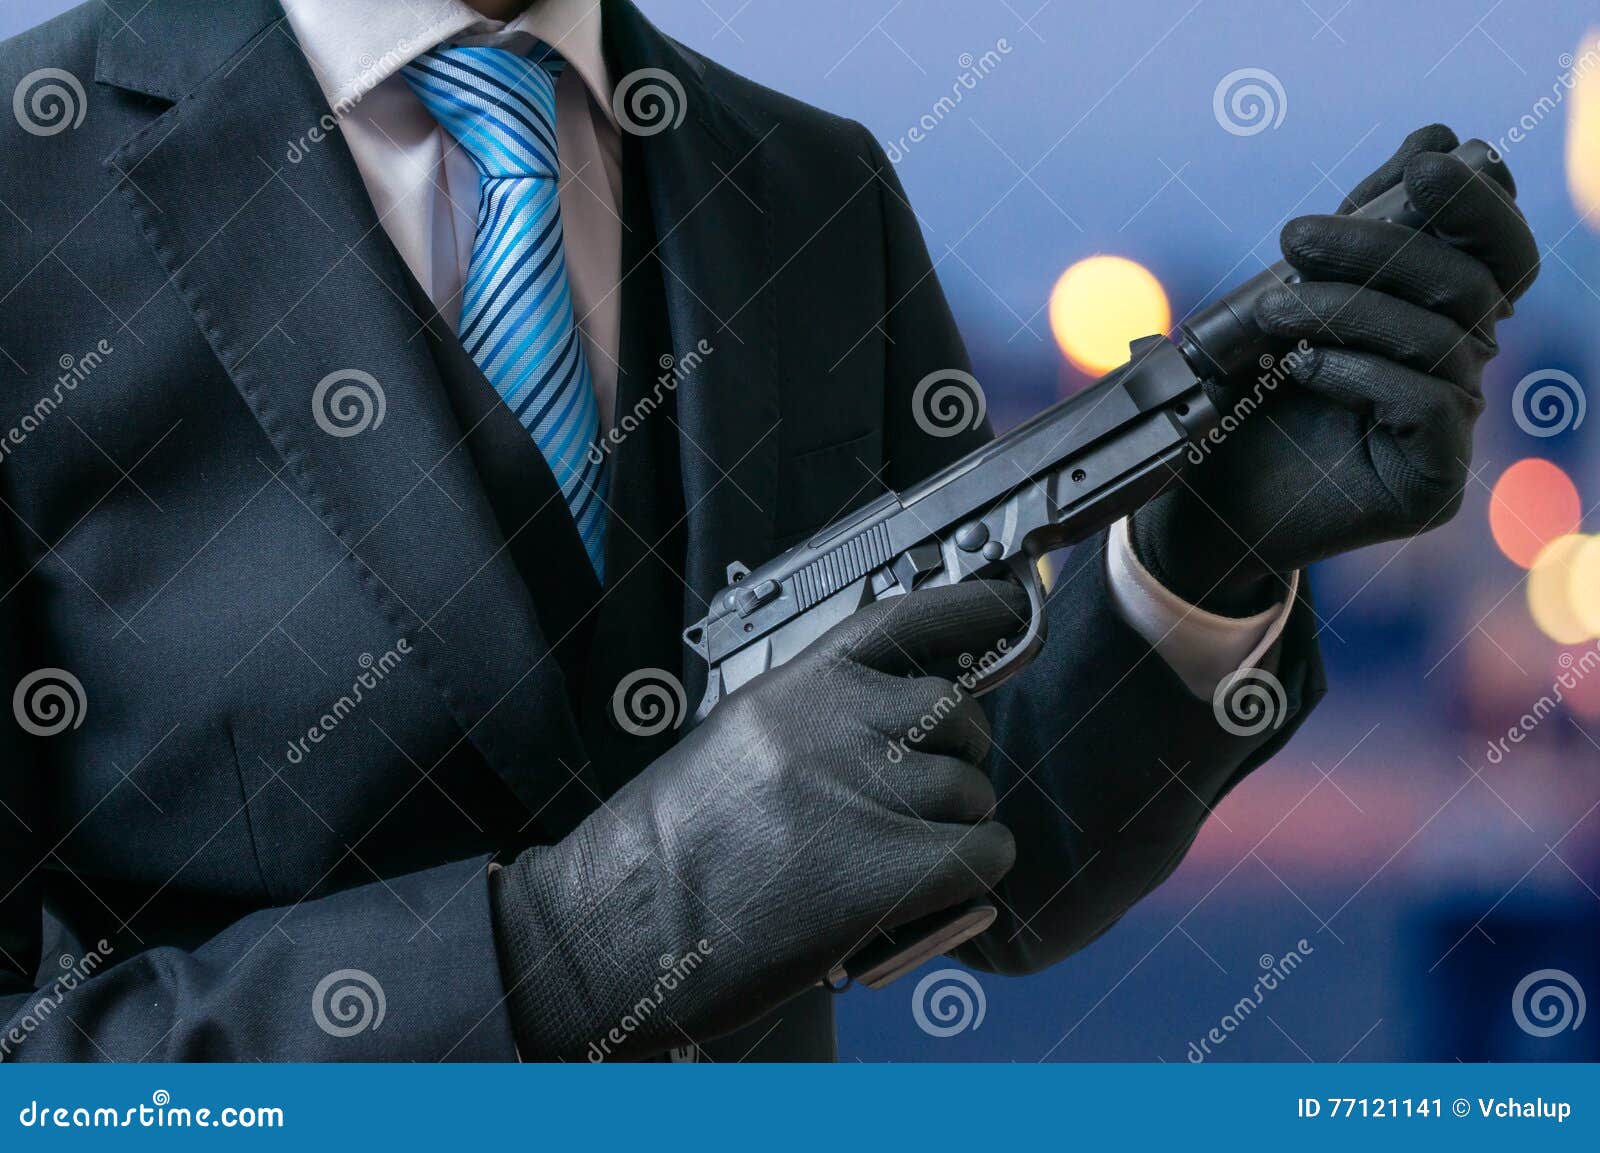 secret agent holds pistol with silencer in hands at twilight